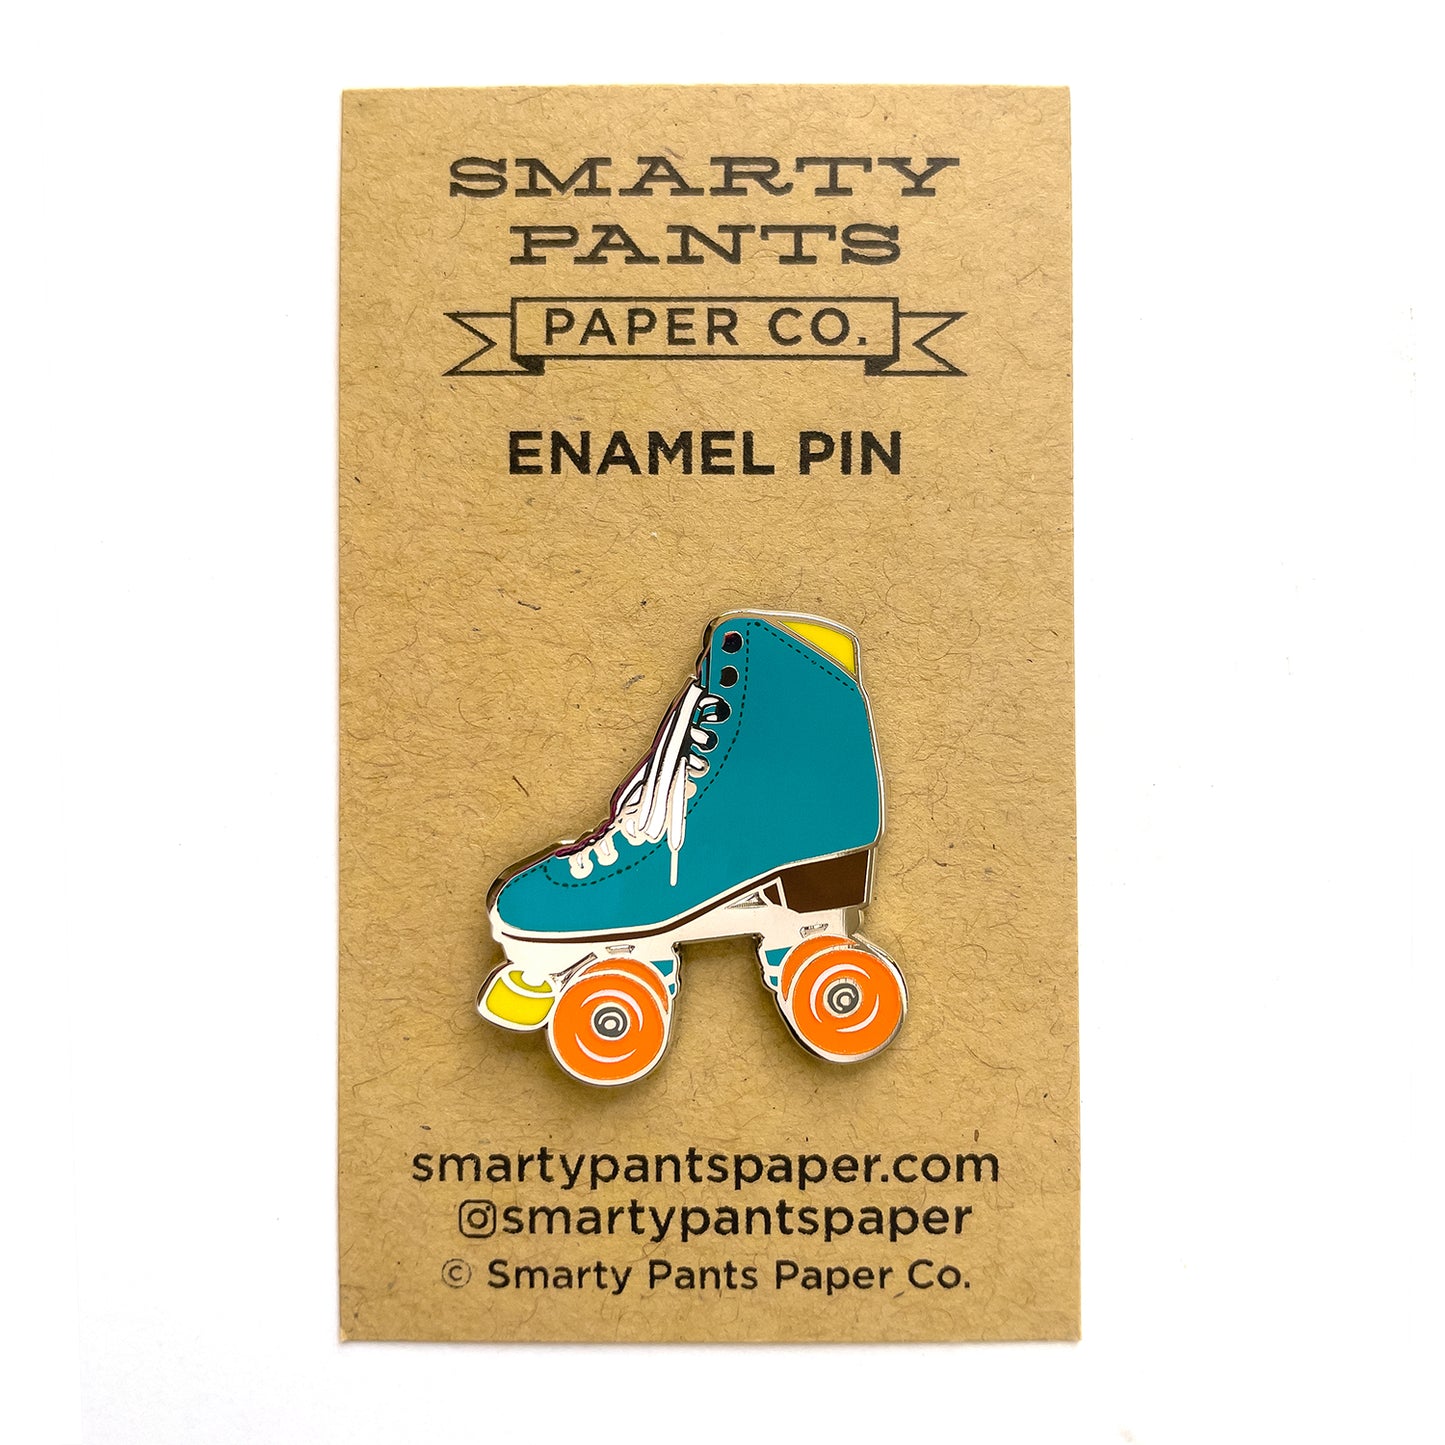 Teal roller skate pin with glow in the dark wheels